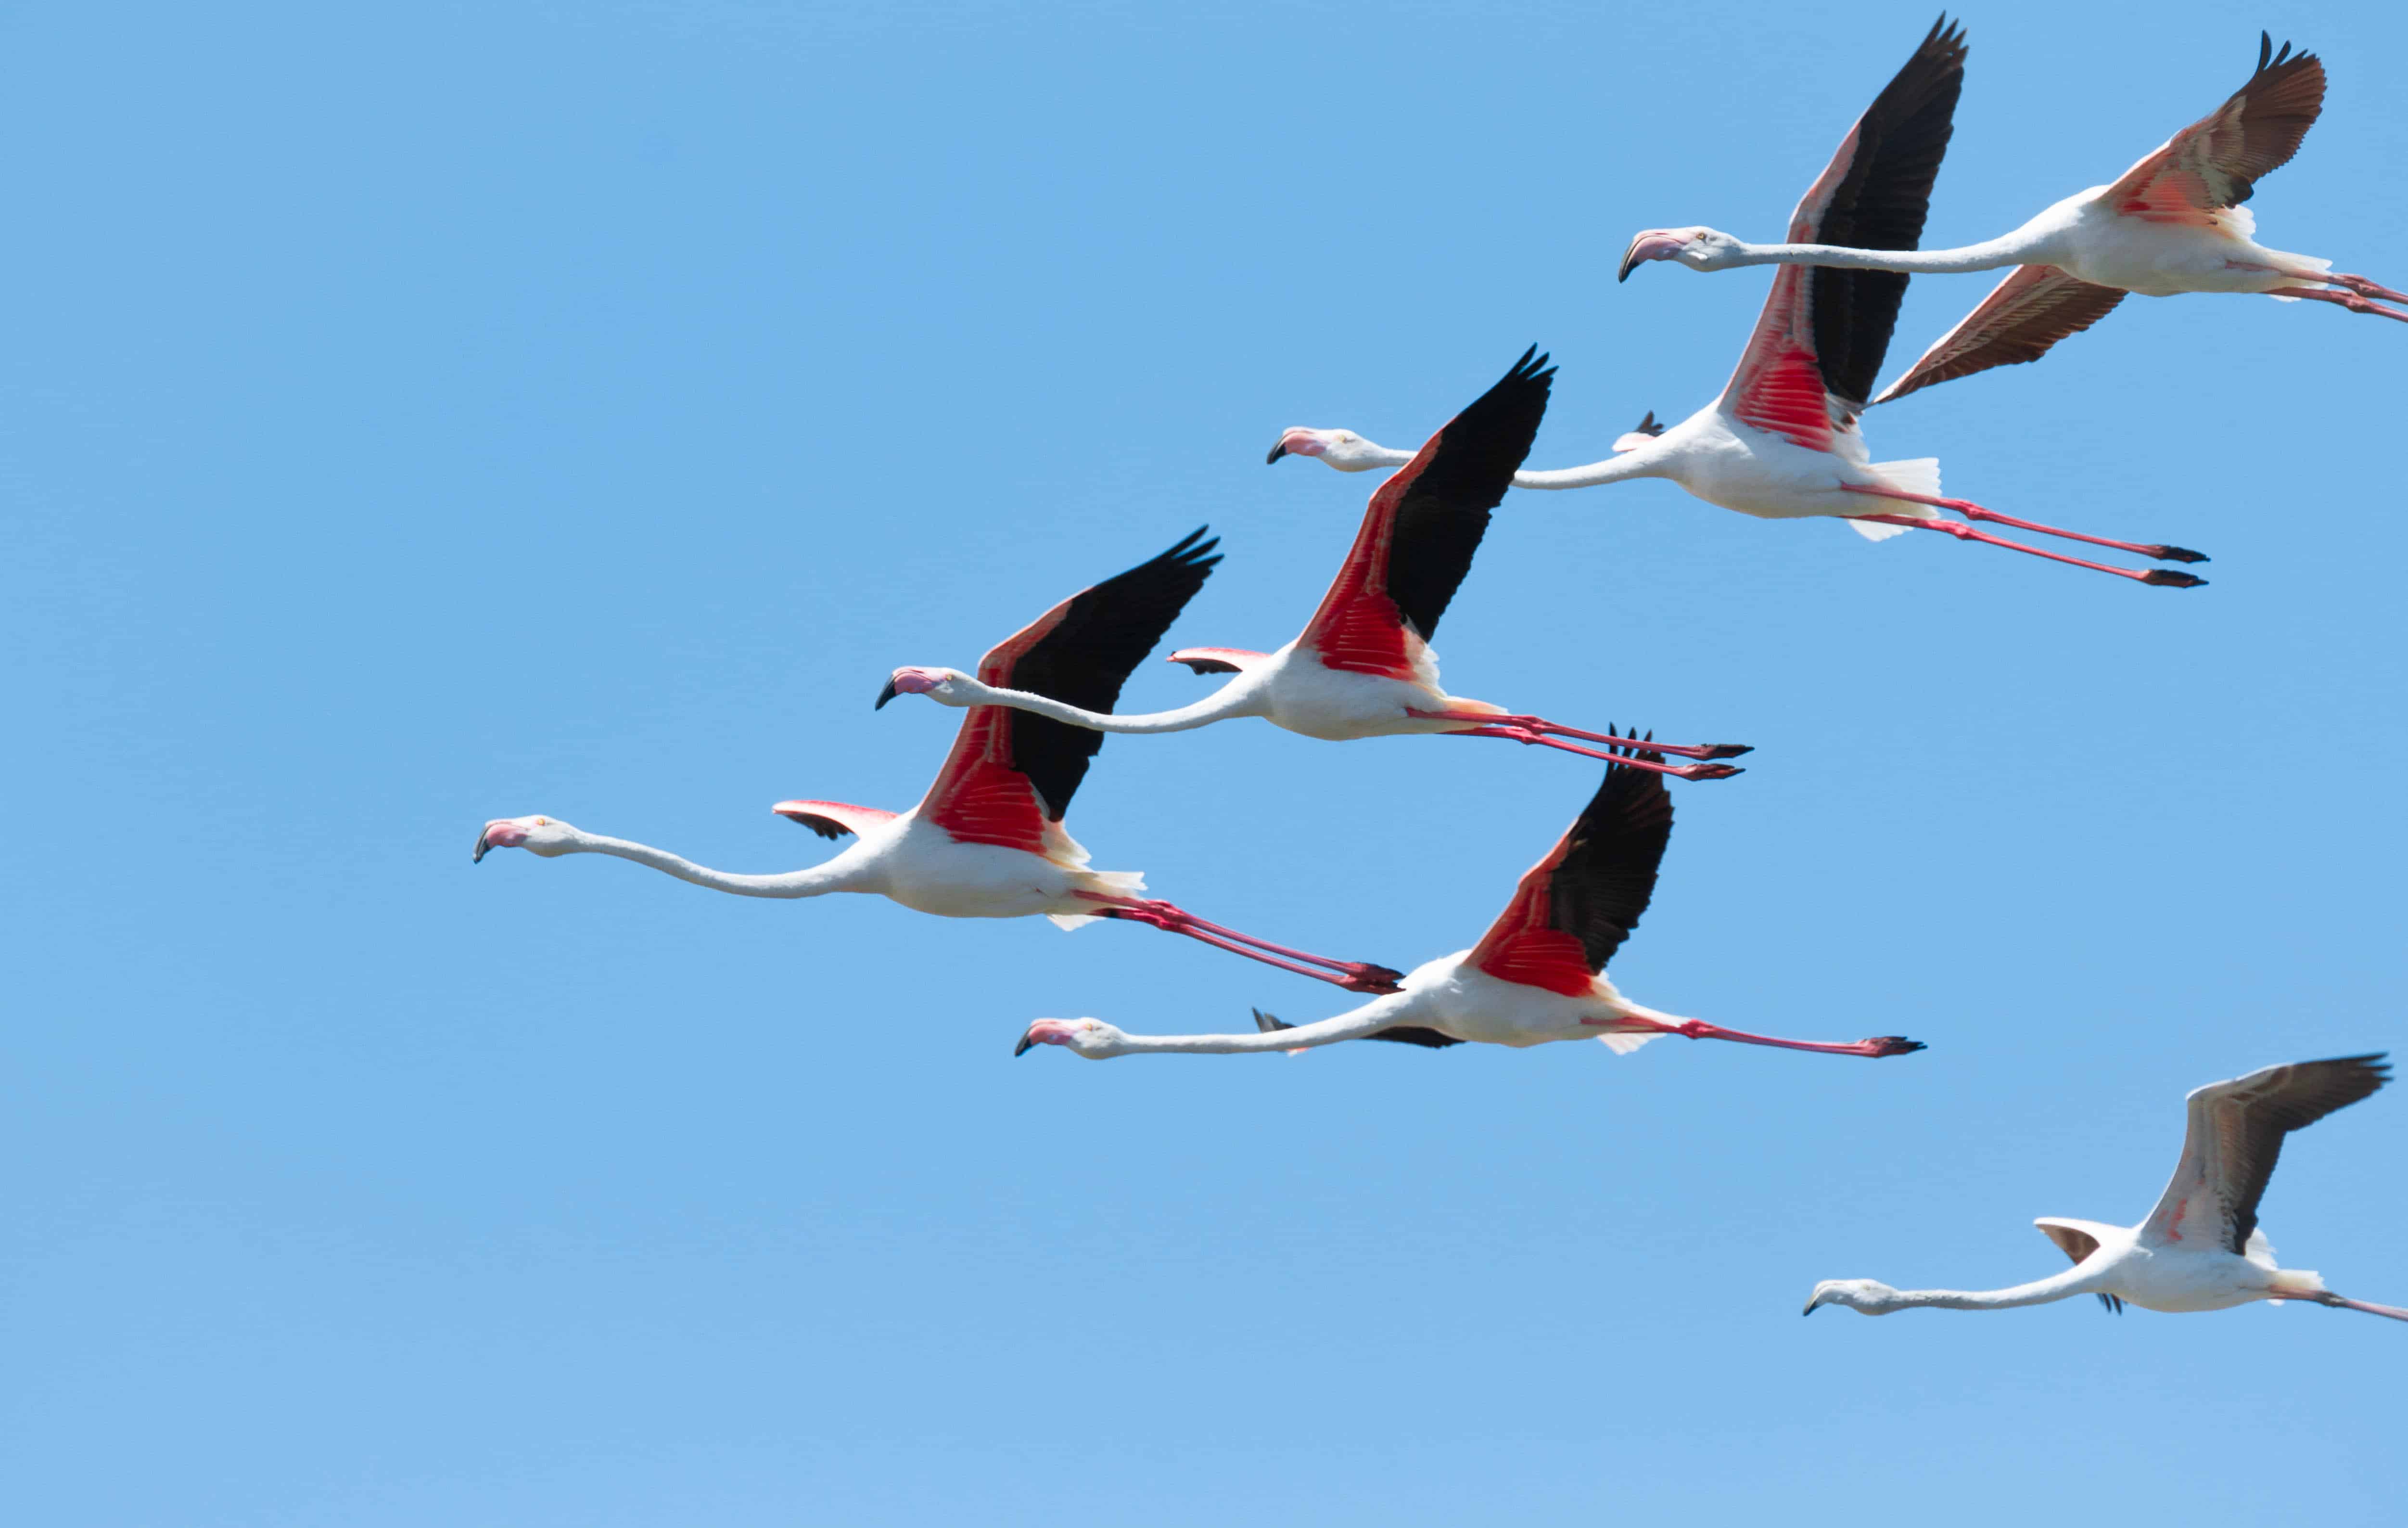 Flamingos during a Birdwatching boat tour in ria formosa